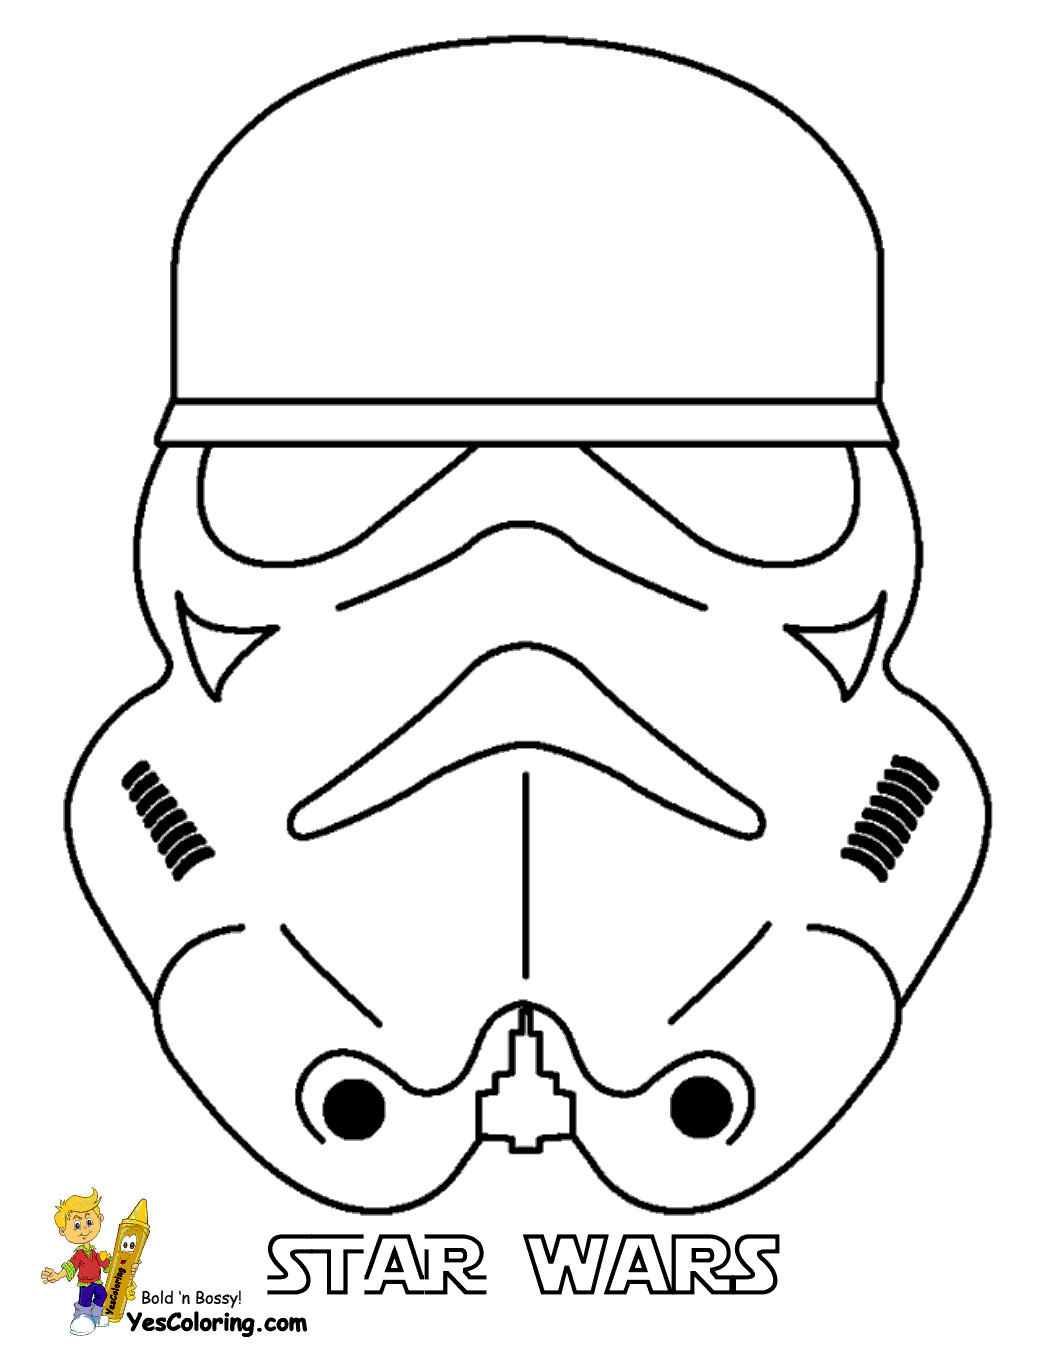 Coloring Pages For Boys Star Wwars
 Famous Star Wars Coloring Darth Vader